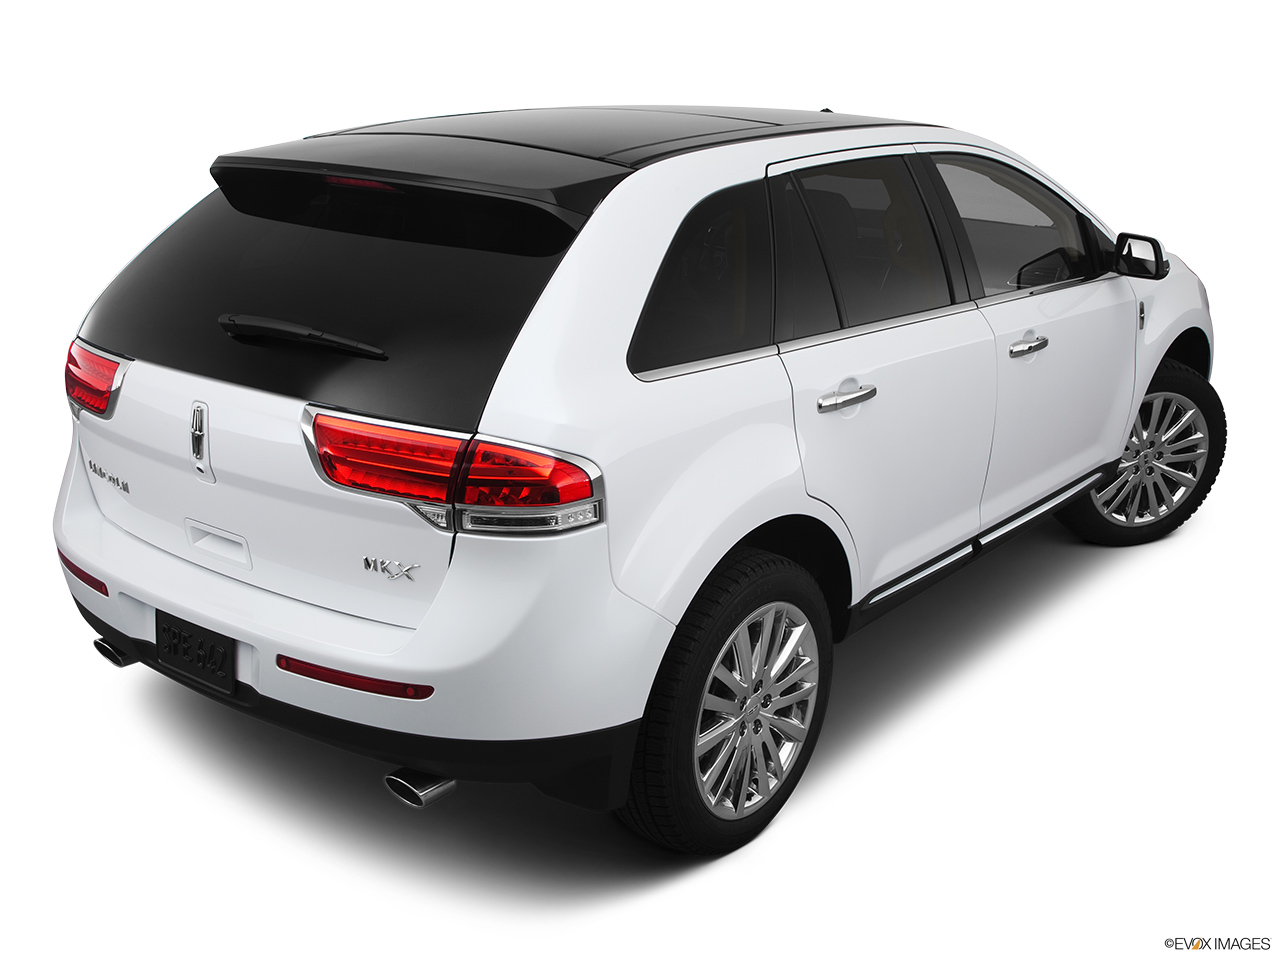 2013 Lincoln MKX FWD Rear 3/4 angle view. 